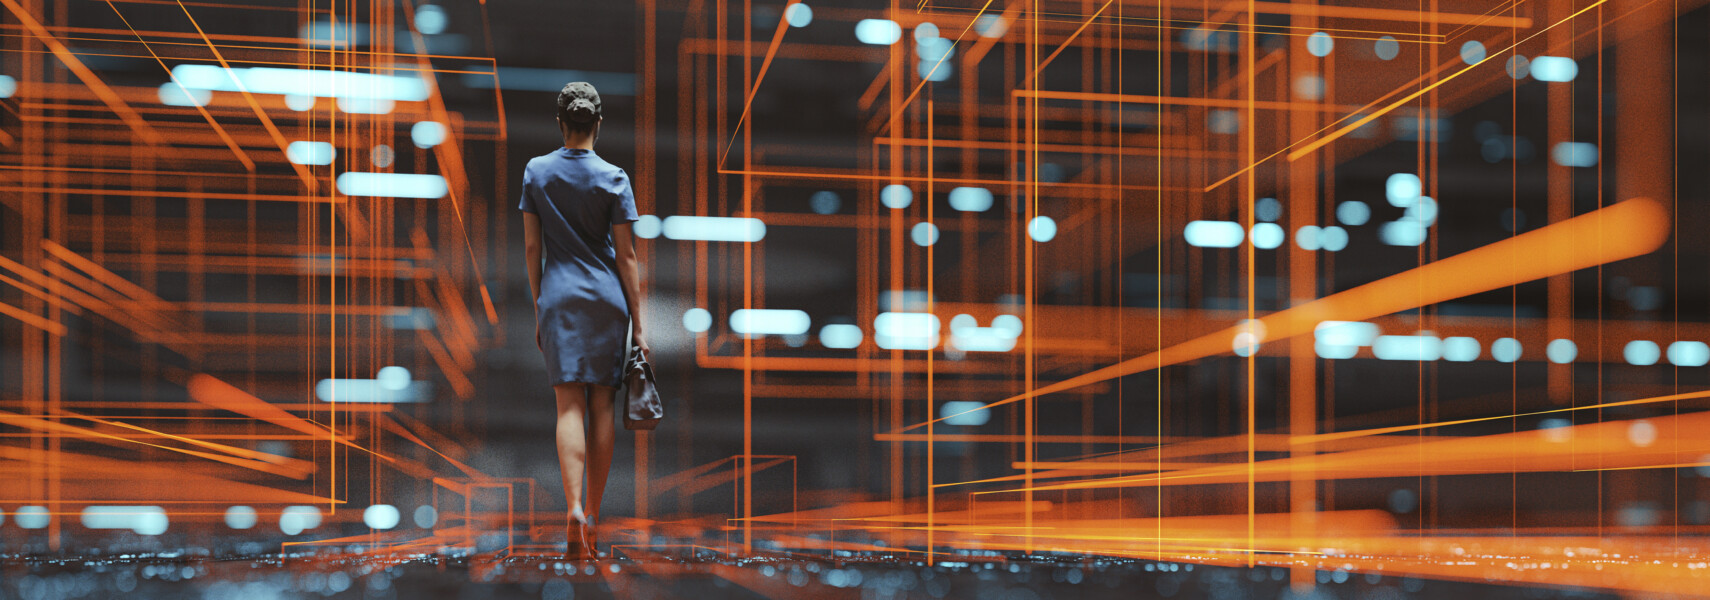 Futuristic City VR Wire Frame With Businesswoman Walking